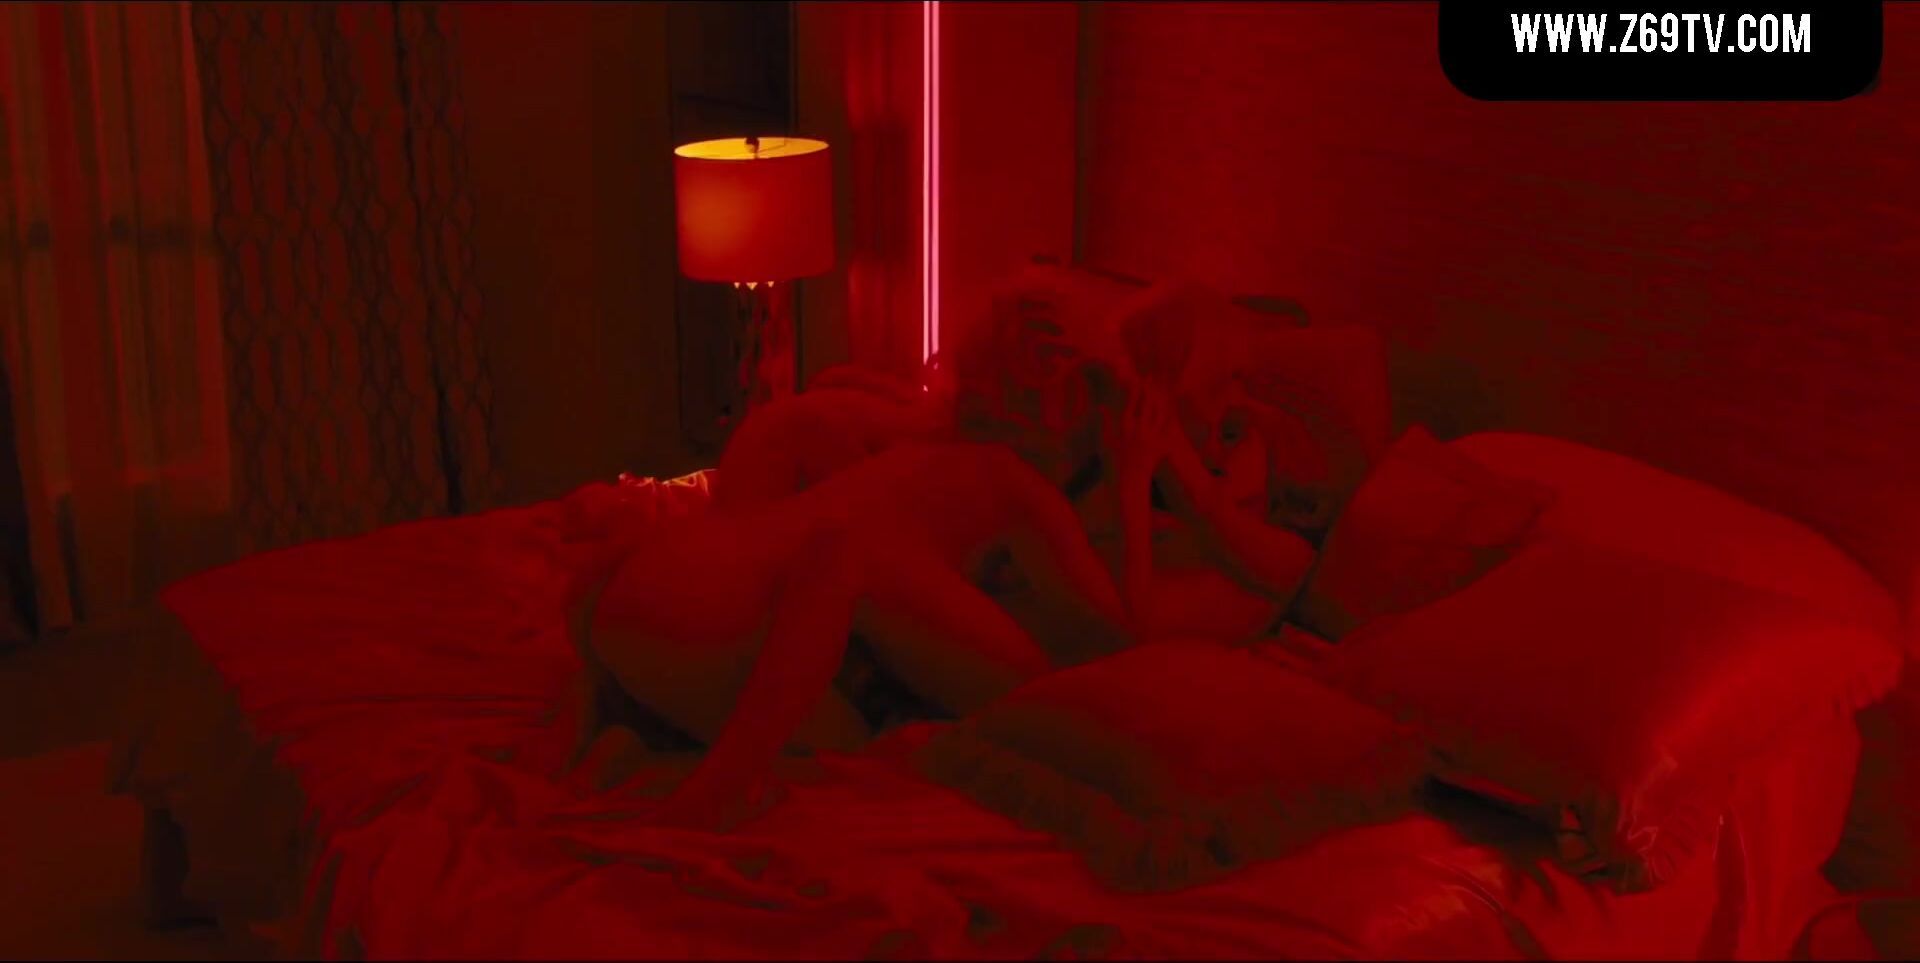 Gilf Jett from self-titled TV series watches three blondes having lesbian sex in bed Tranny